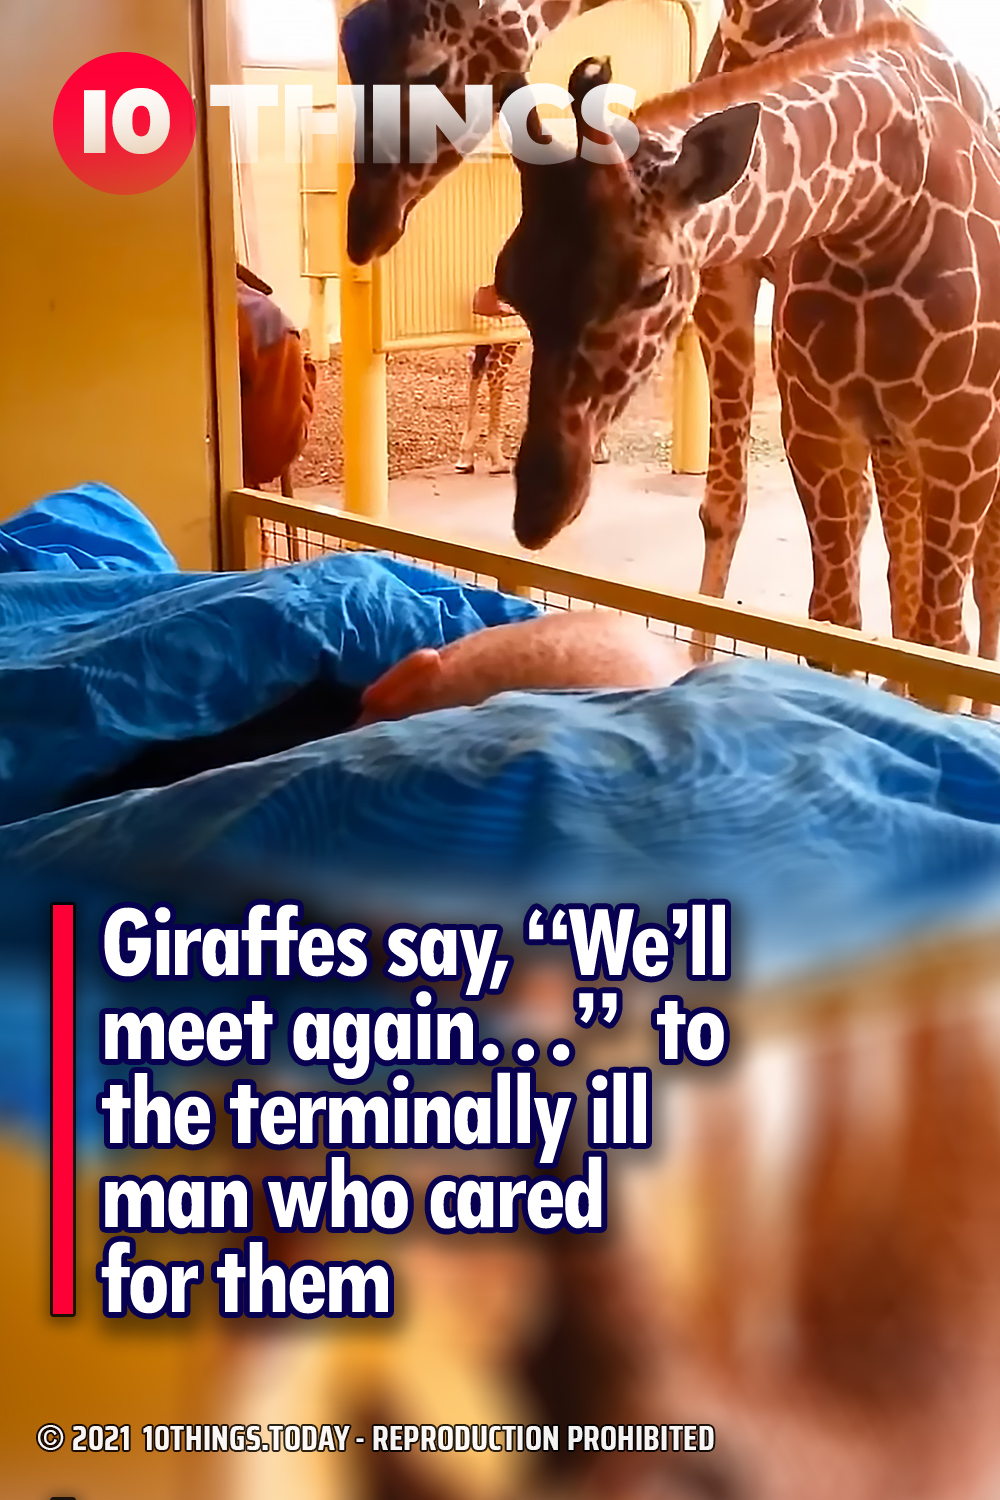 Giraffes say, “We’ll meet again…”  to the terminally ill man who cared for them